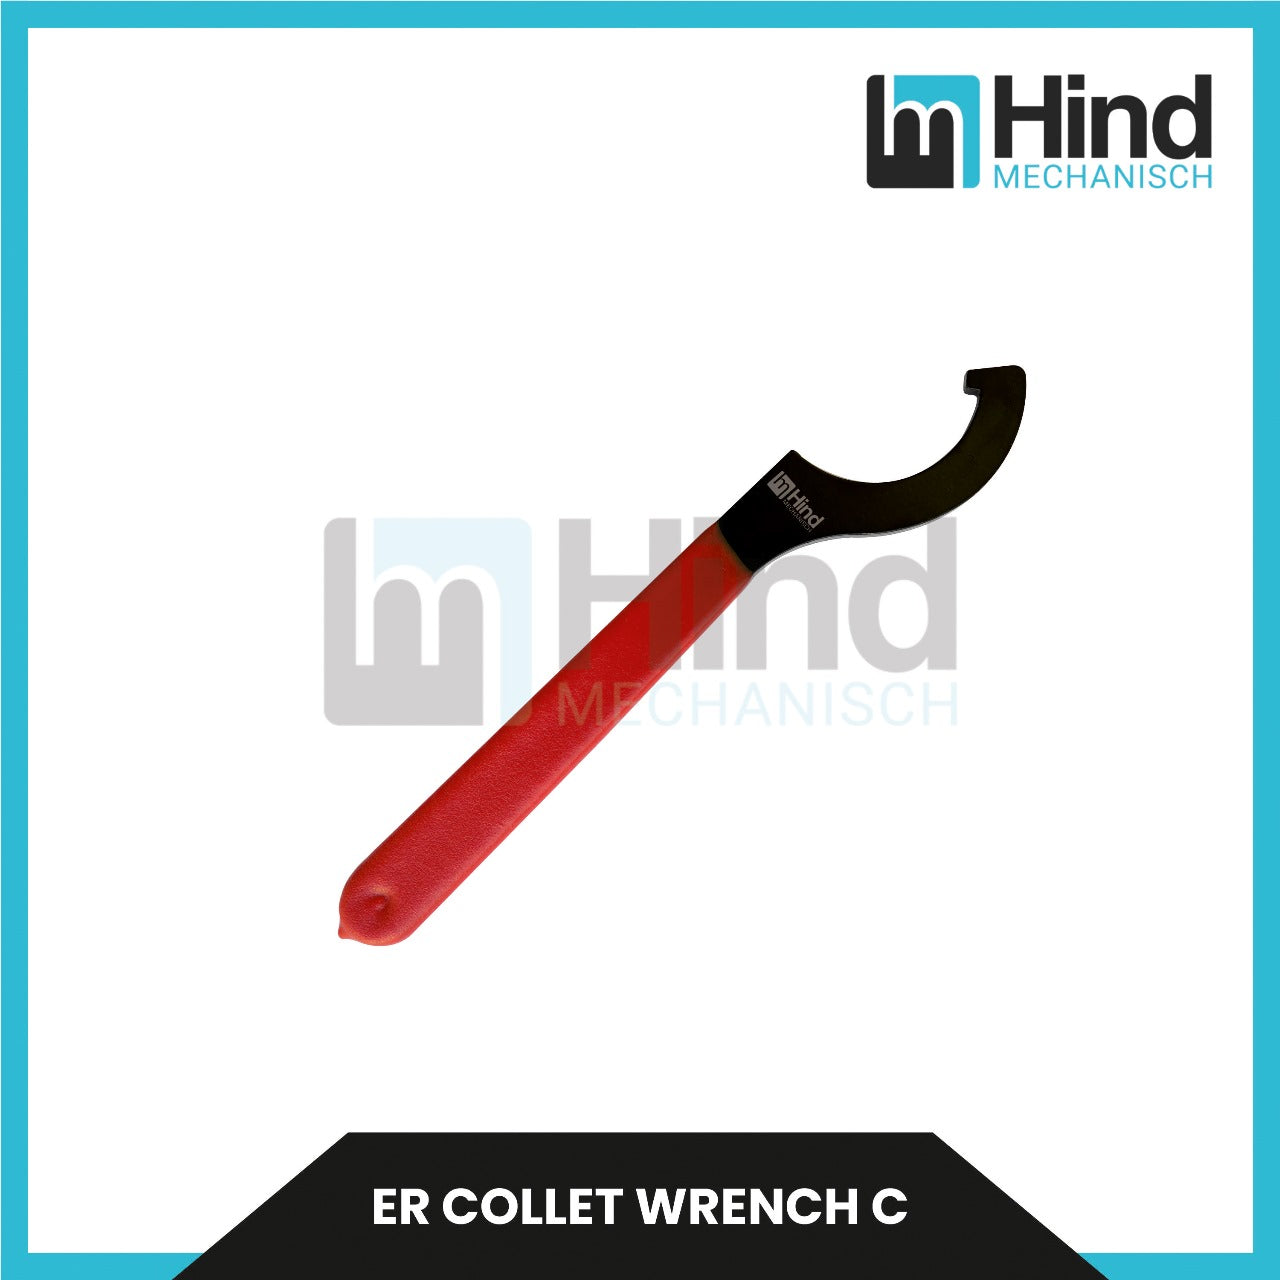 ER COLLET WRENCH TYPE C